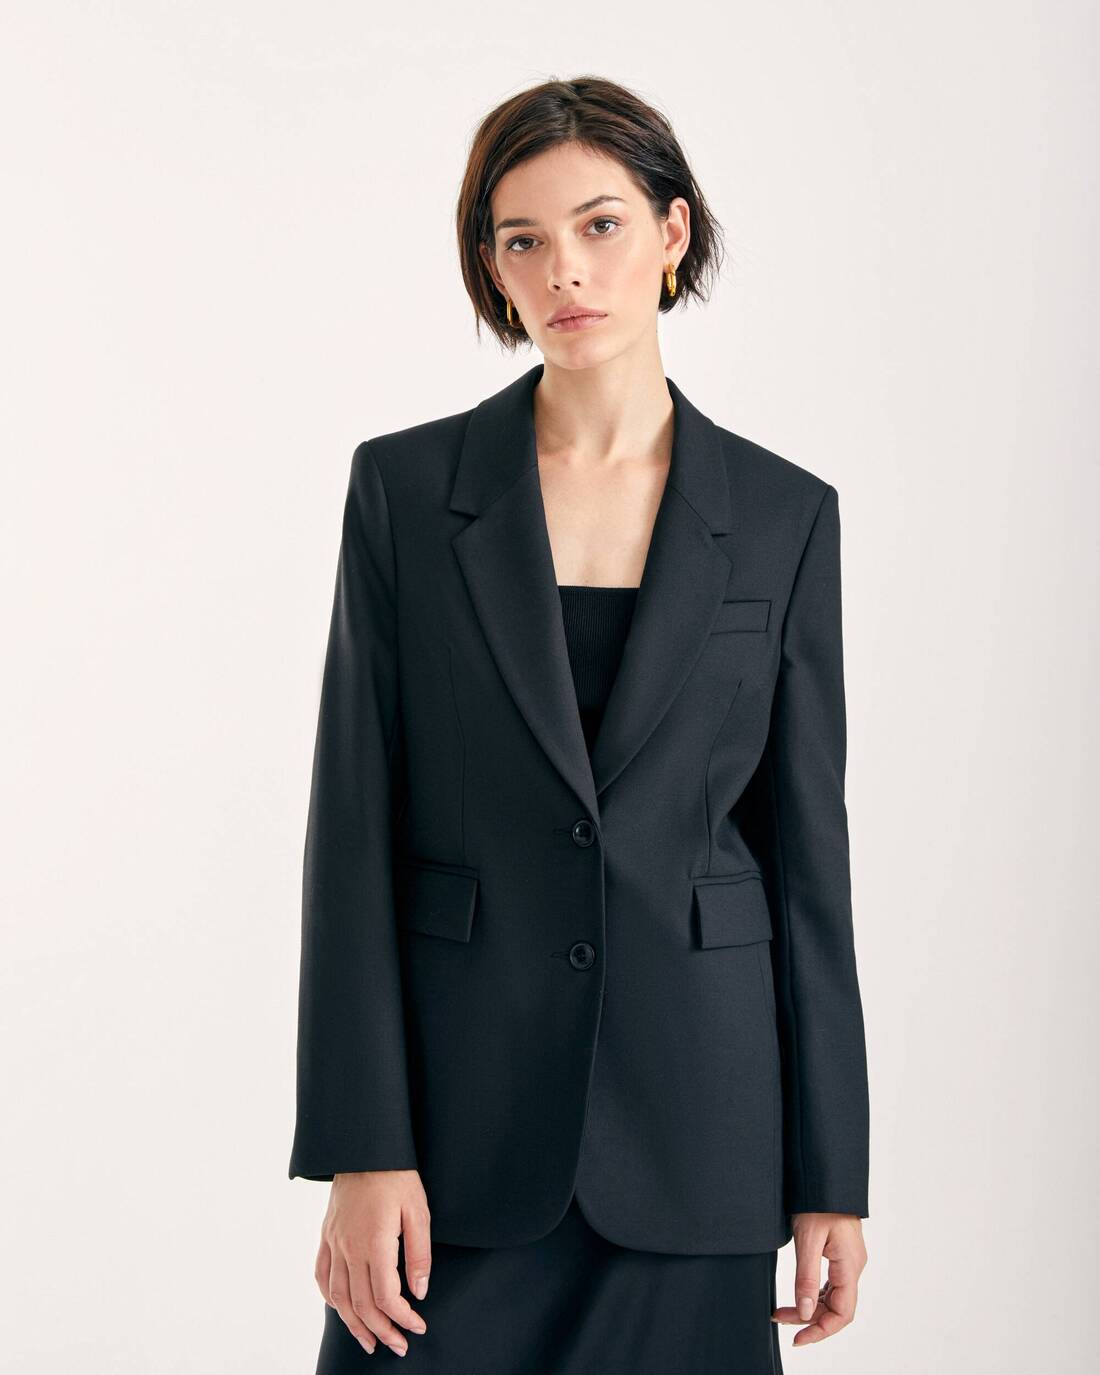 Textured semi-fitted jacket